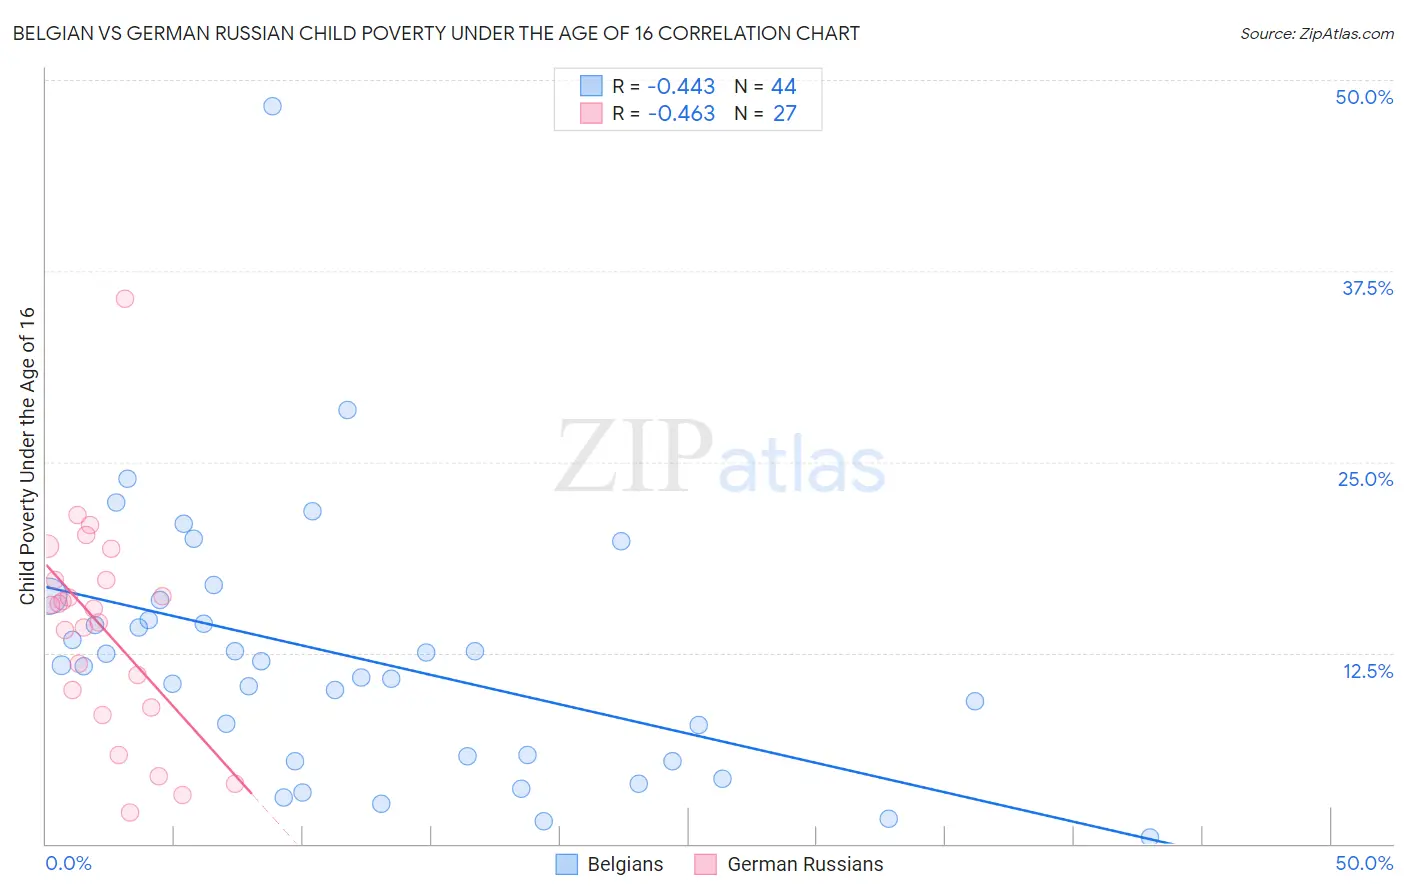 Belgian vs German Russian Child Poverty Under the Age of 16